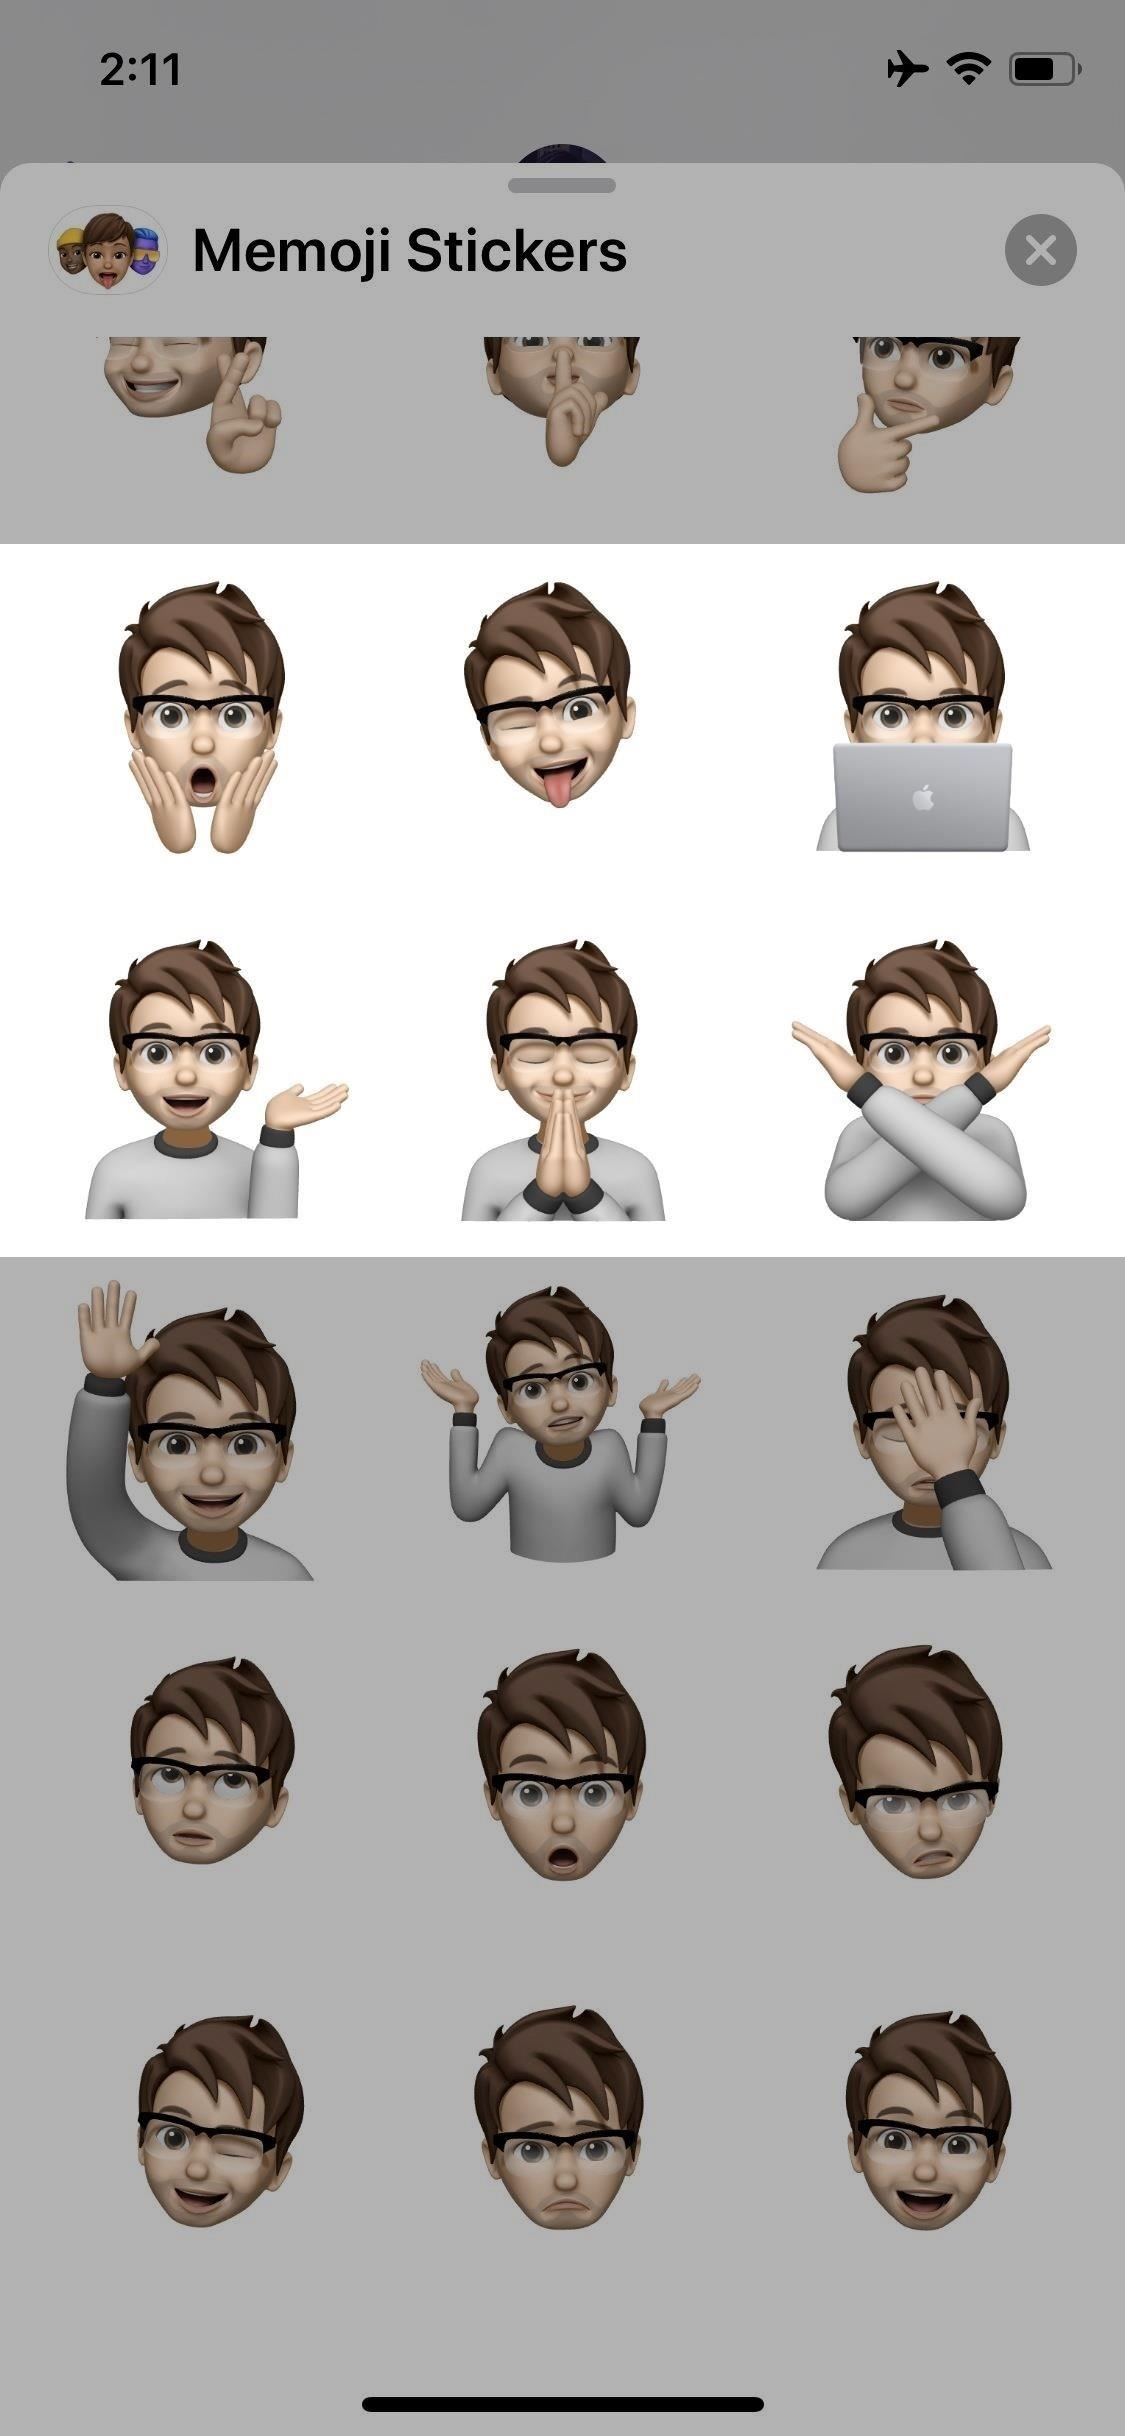 Apple Just Released iOS 13.4 Public Beta 1 for iPhone, Includes New Memoji Stickers & More Convenient Mail Tools